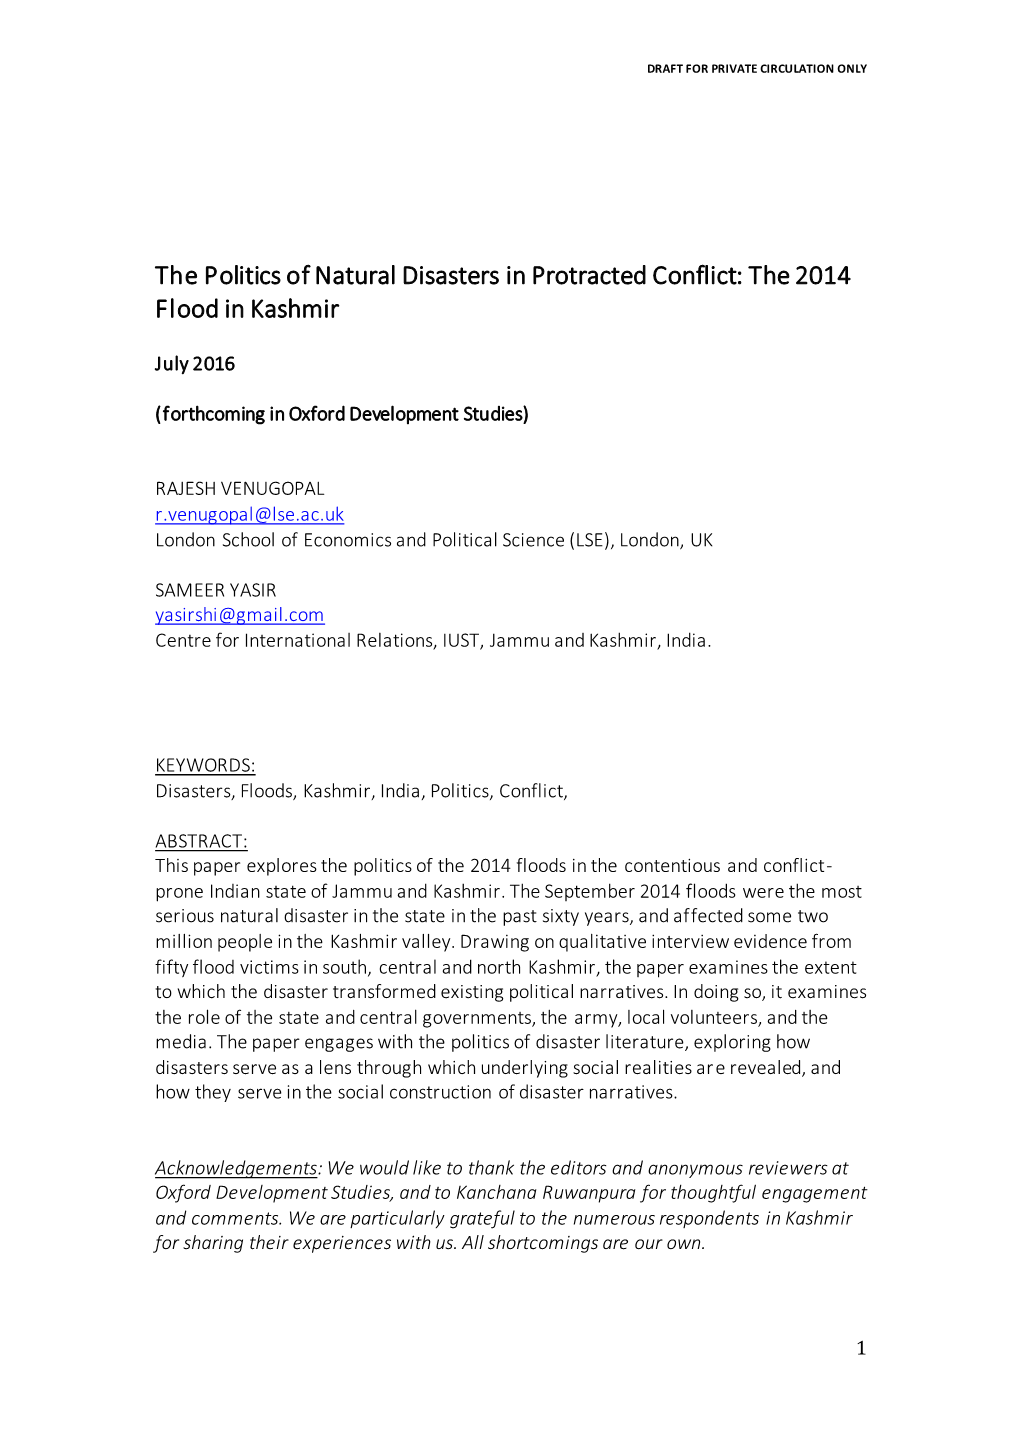 The Politics of Natural Disasters in Protracted Conflict: the 2014 Flood in Kashmir